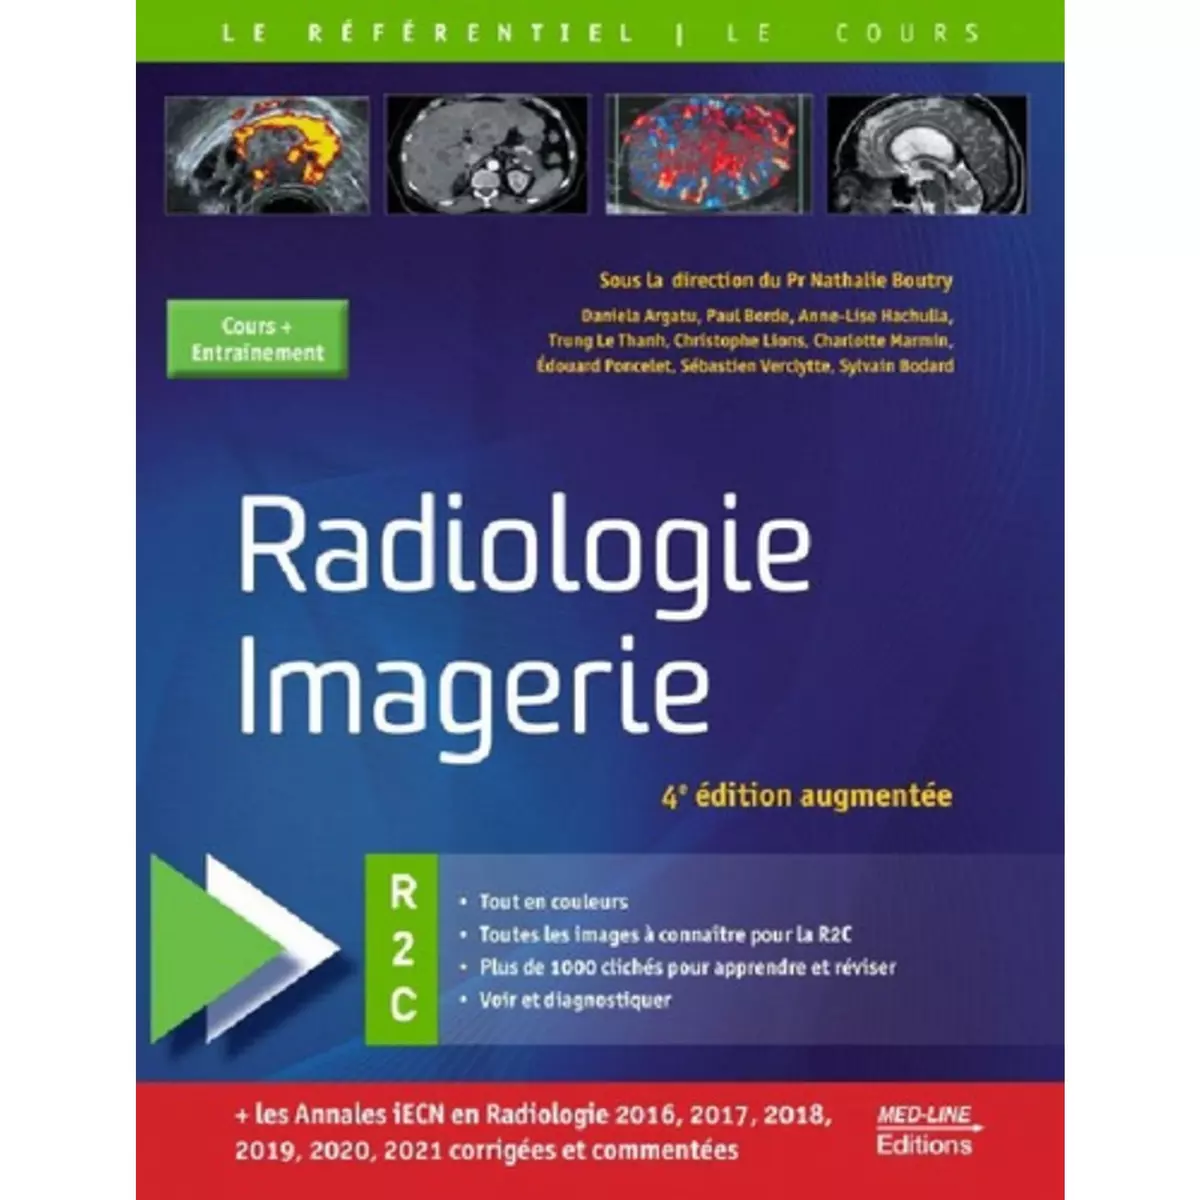  RADIOLOGIE IMAGERIE. 4E EDITION REVUE ET AUGMENTEE, Boutry Nathalie